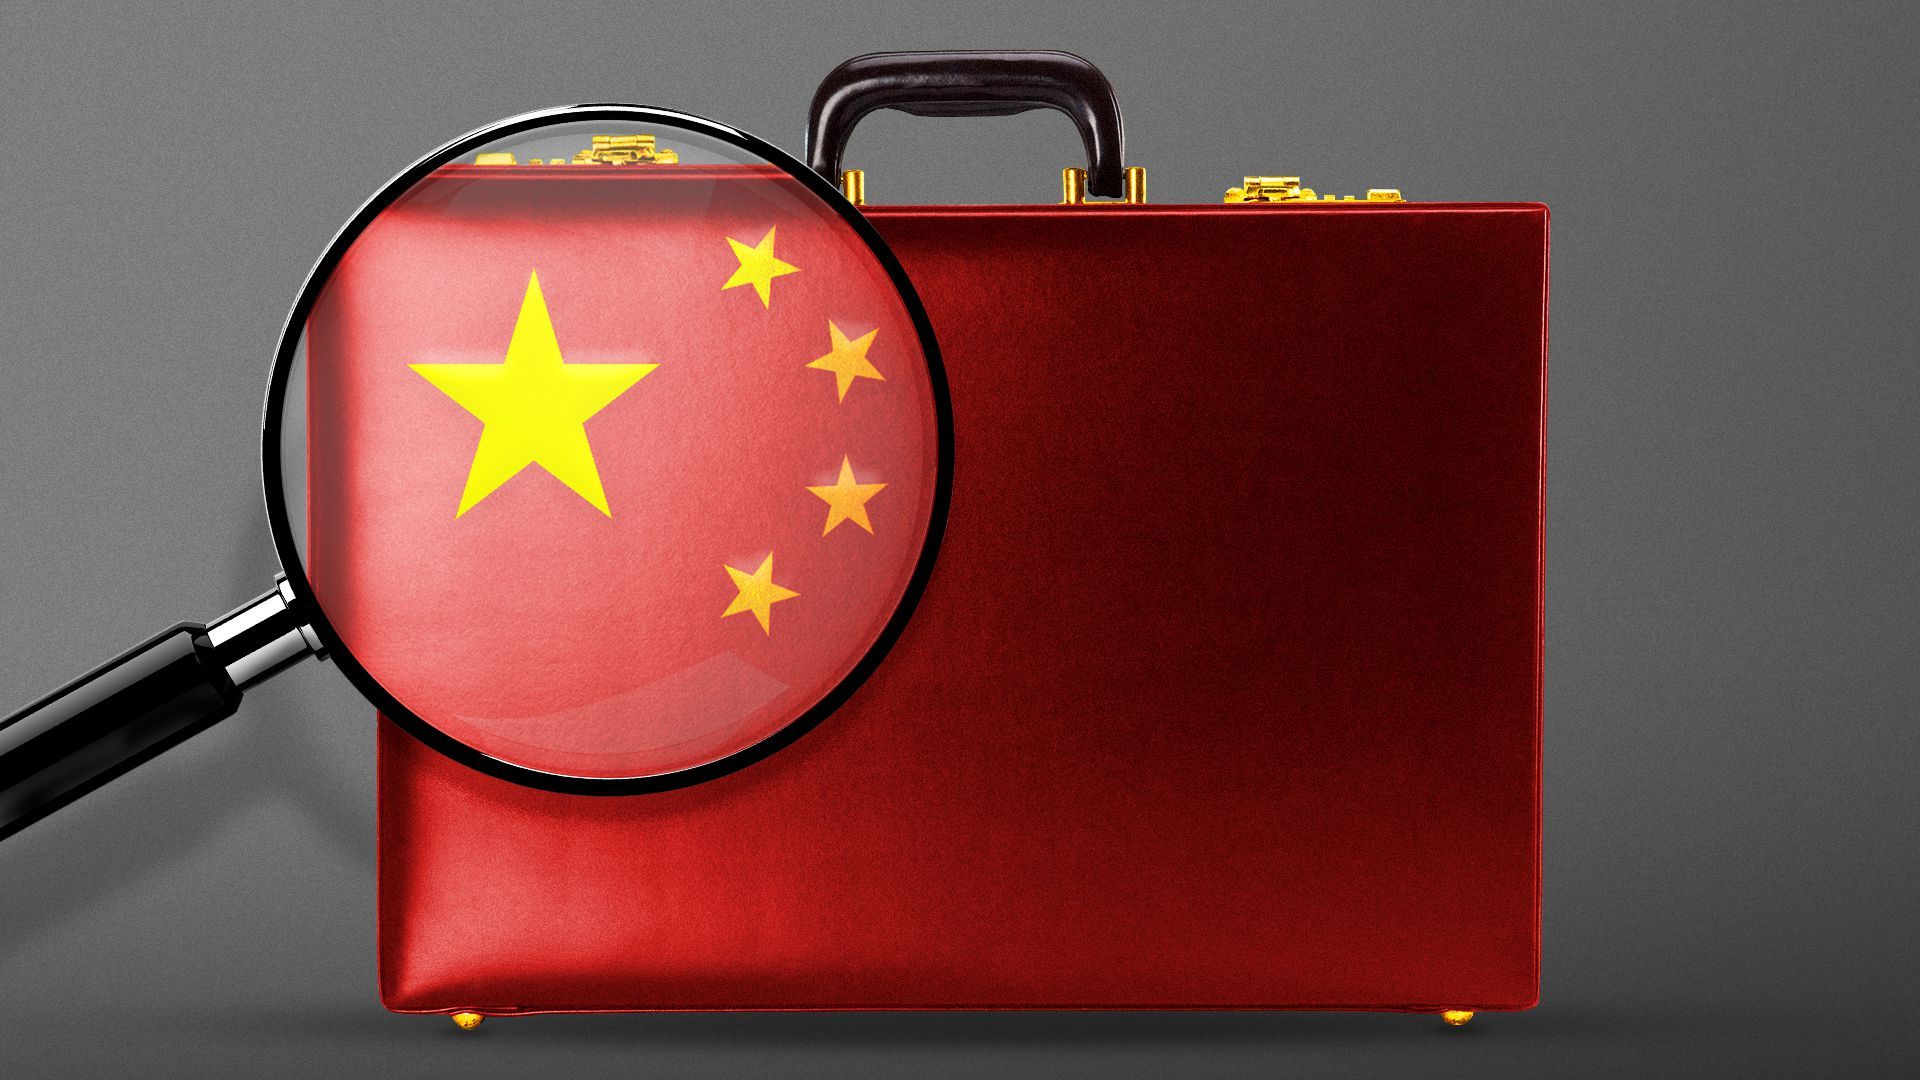 Illustration of a magnifying glass inspecting a briefcase that looks like the Chinese flag.